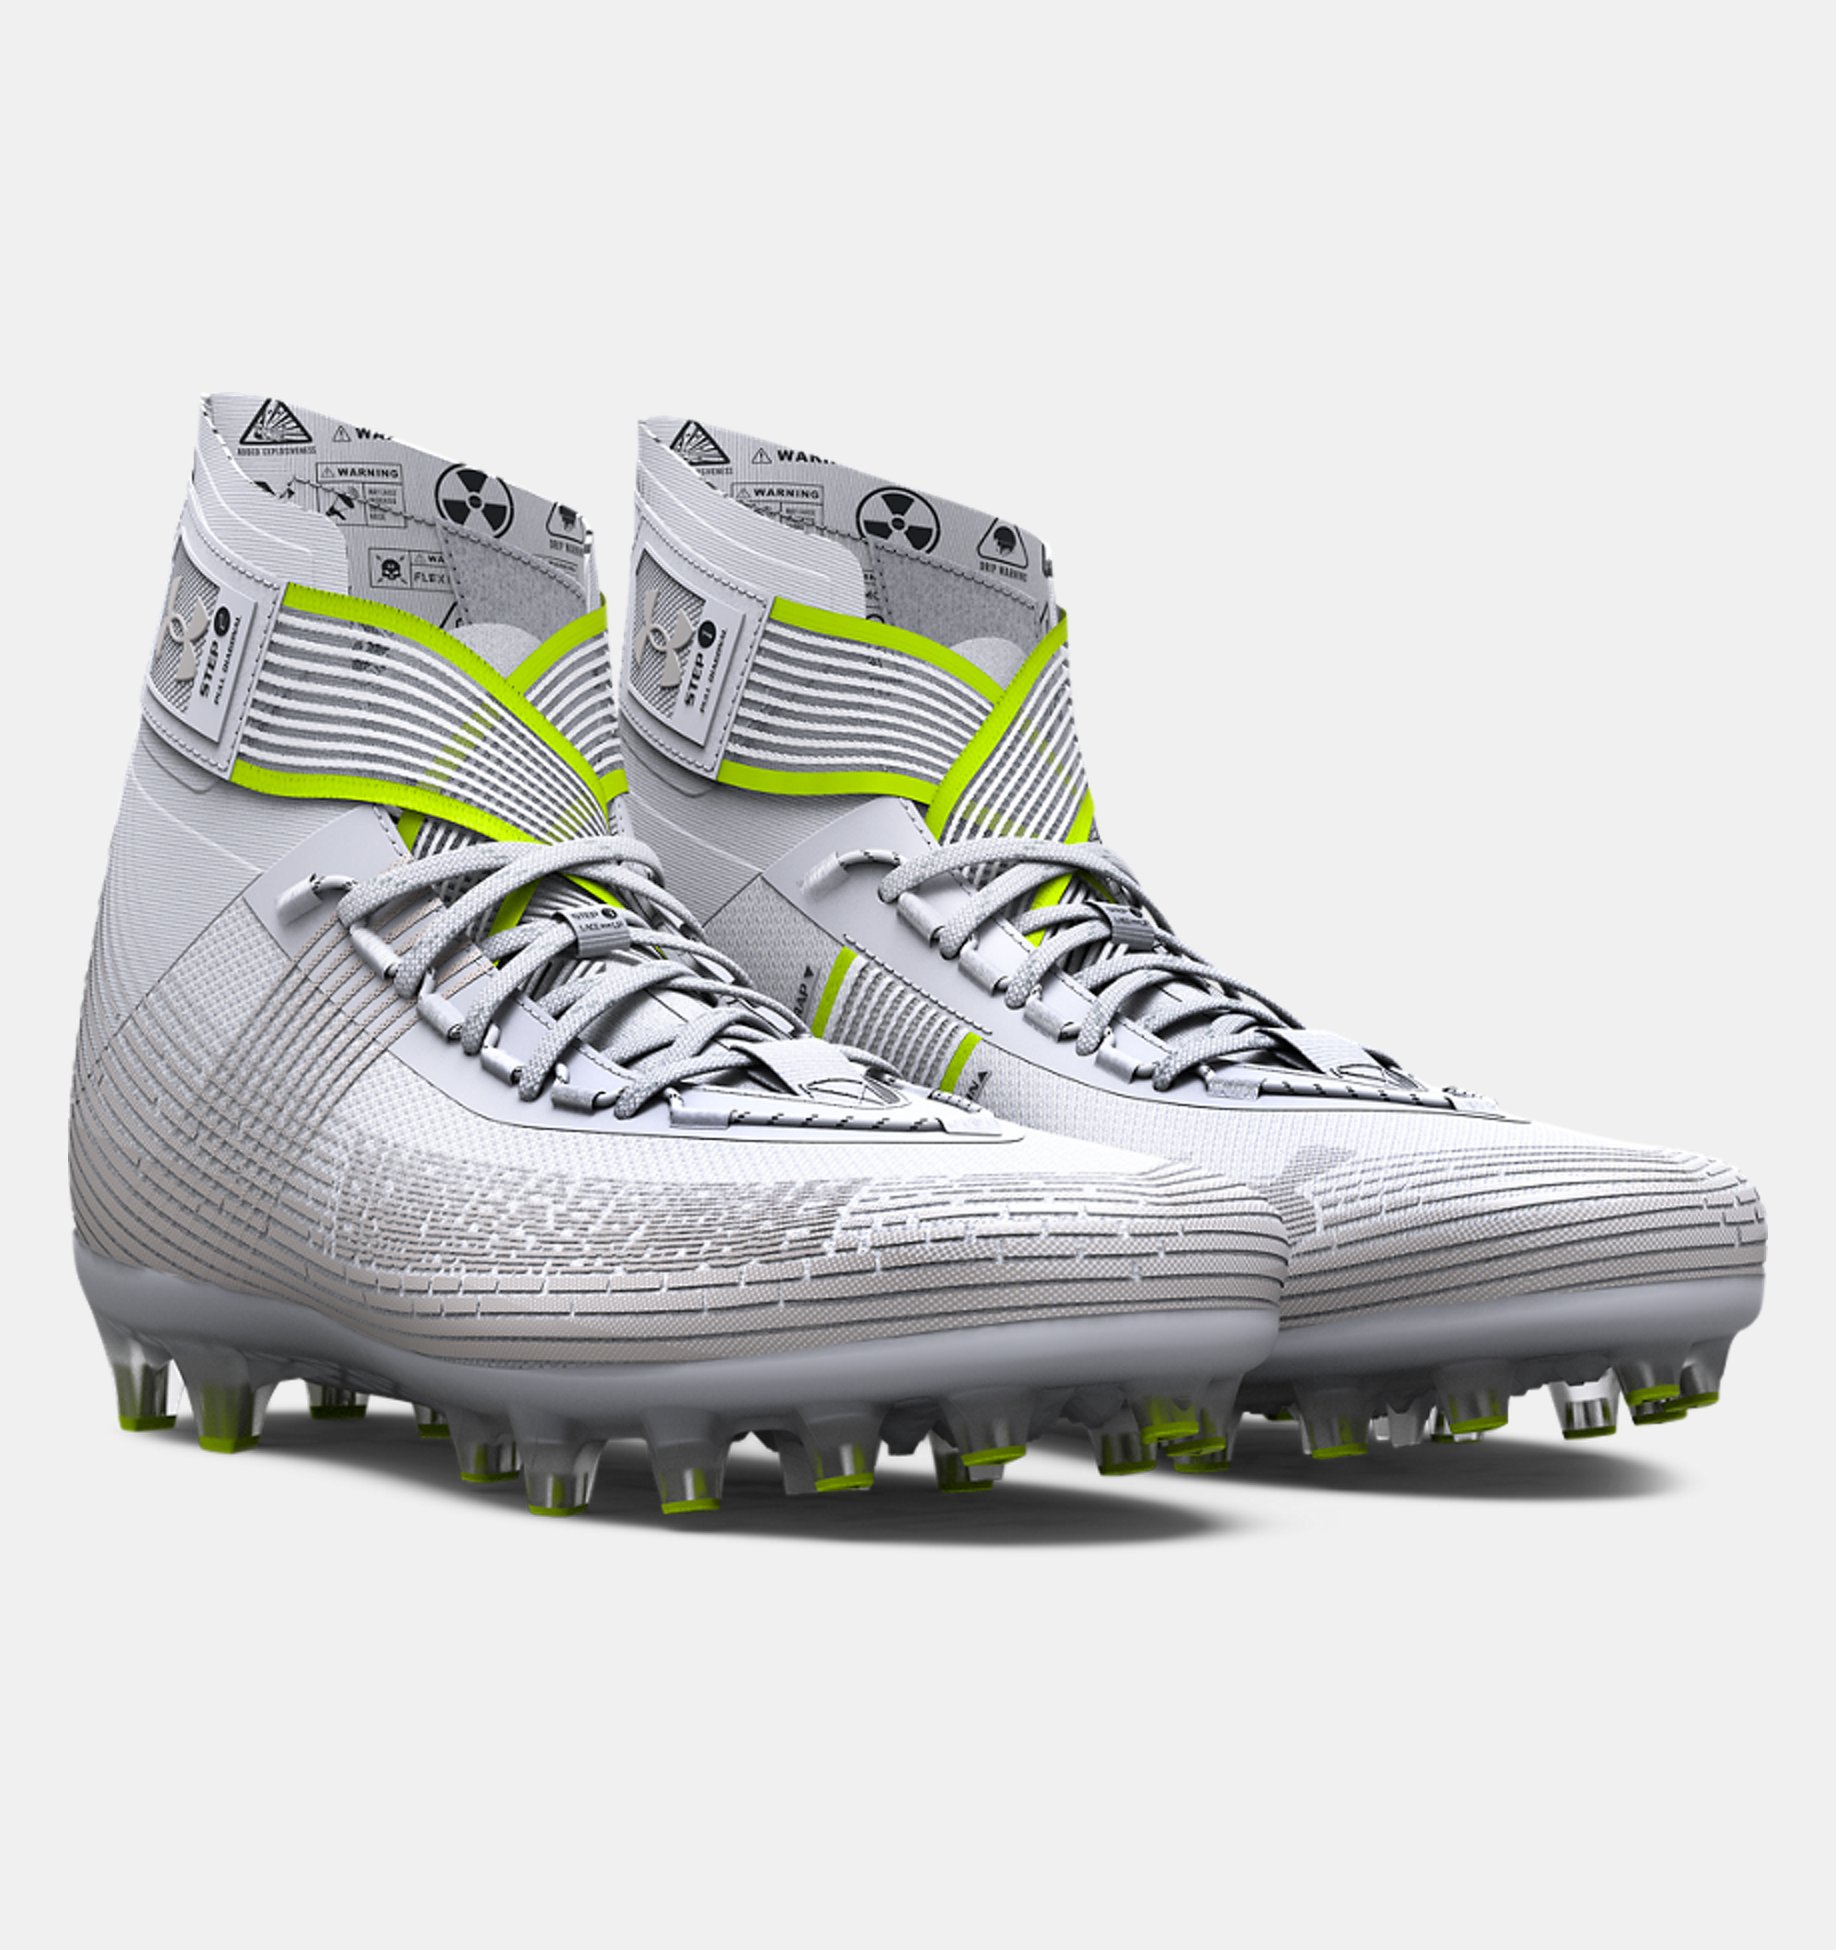 Details about   $130 NEW Under Armour UA Highlight MC Football Cleats Men 8-13 White 3020266-101 